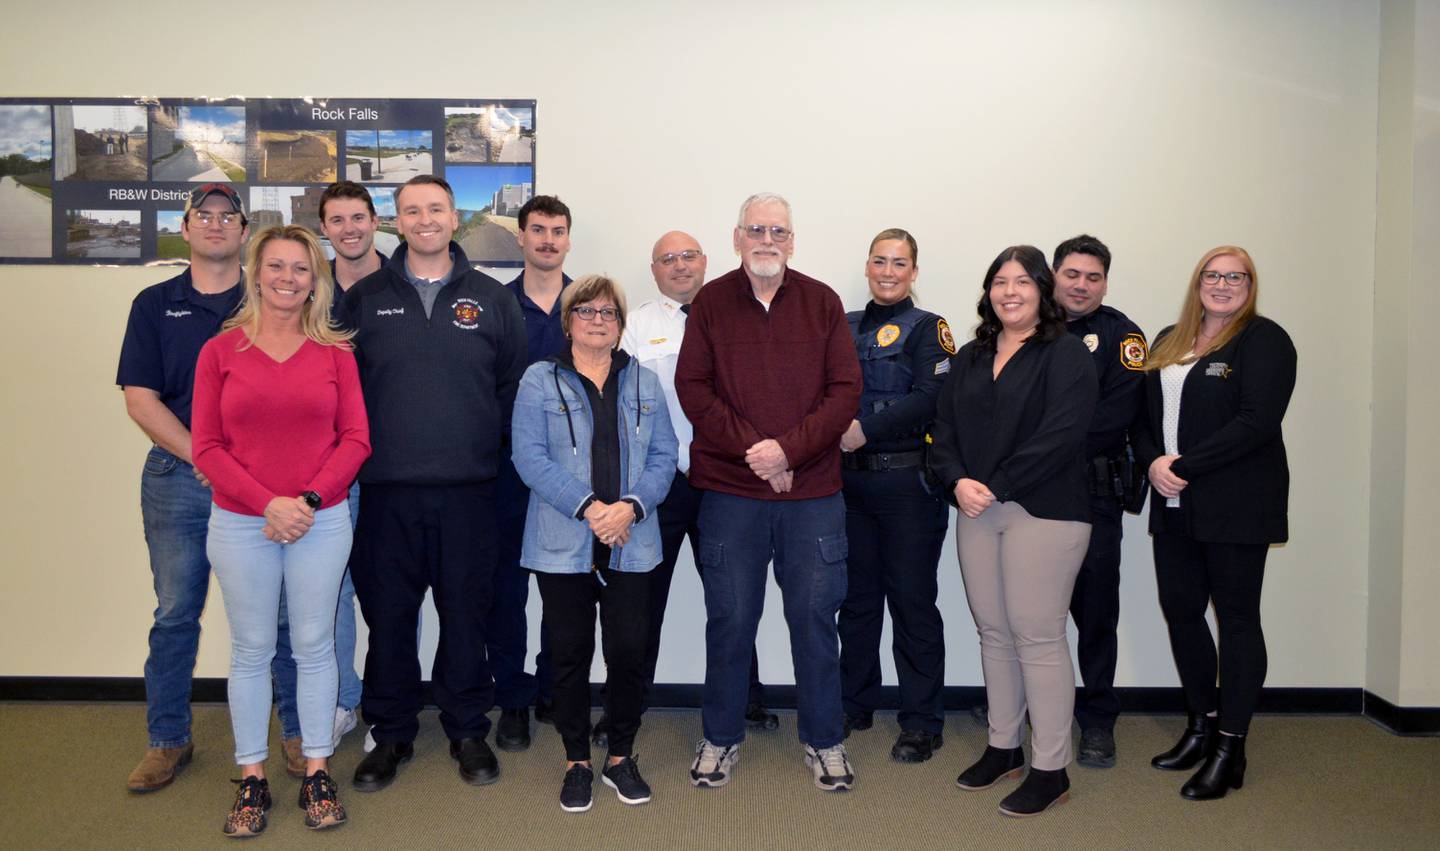 Tim Isaac, of Rockford, center, stands with his wife and daughter on March 19, 2024, surrounded by the first responders who helped save his life when he suffered cardiac arrest on Feb. 14 while driving near Interstate 88 and Illinois Route 40. In the front row, left to right, are: Angel Gaudry, Isaac's daughter; Rock Falls Deputy Fire Chief Kyle Sommers; Linda Isaac, Tim Isaac's wife; Isaac; and 911 dispatchers Alexis Echebarria and Tara Baumgartner. In the back row, left to right, are: firefighters Mark McPhillips, Matt Oswalt and Cameron Gonzalez; Rock Falls Police Chief David Pilgrim; police Sgt. Betony Gluff; and police Officer Kristofer Perez. Not pictured is CGH EMS Danny Surdez.